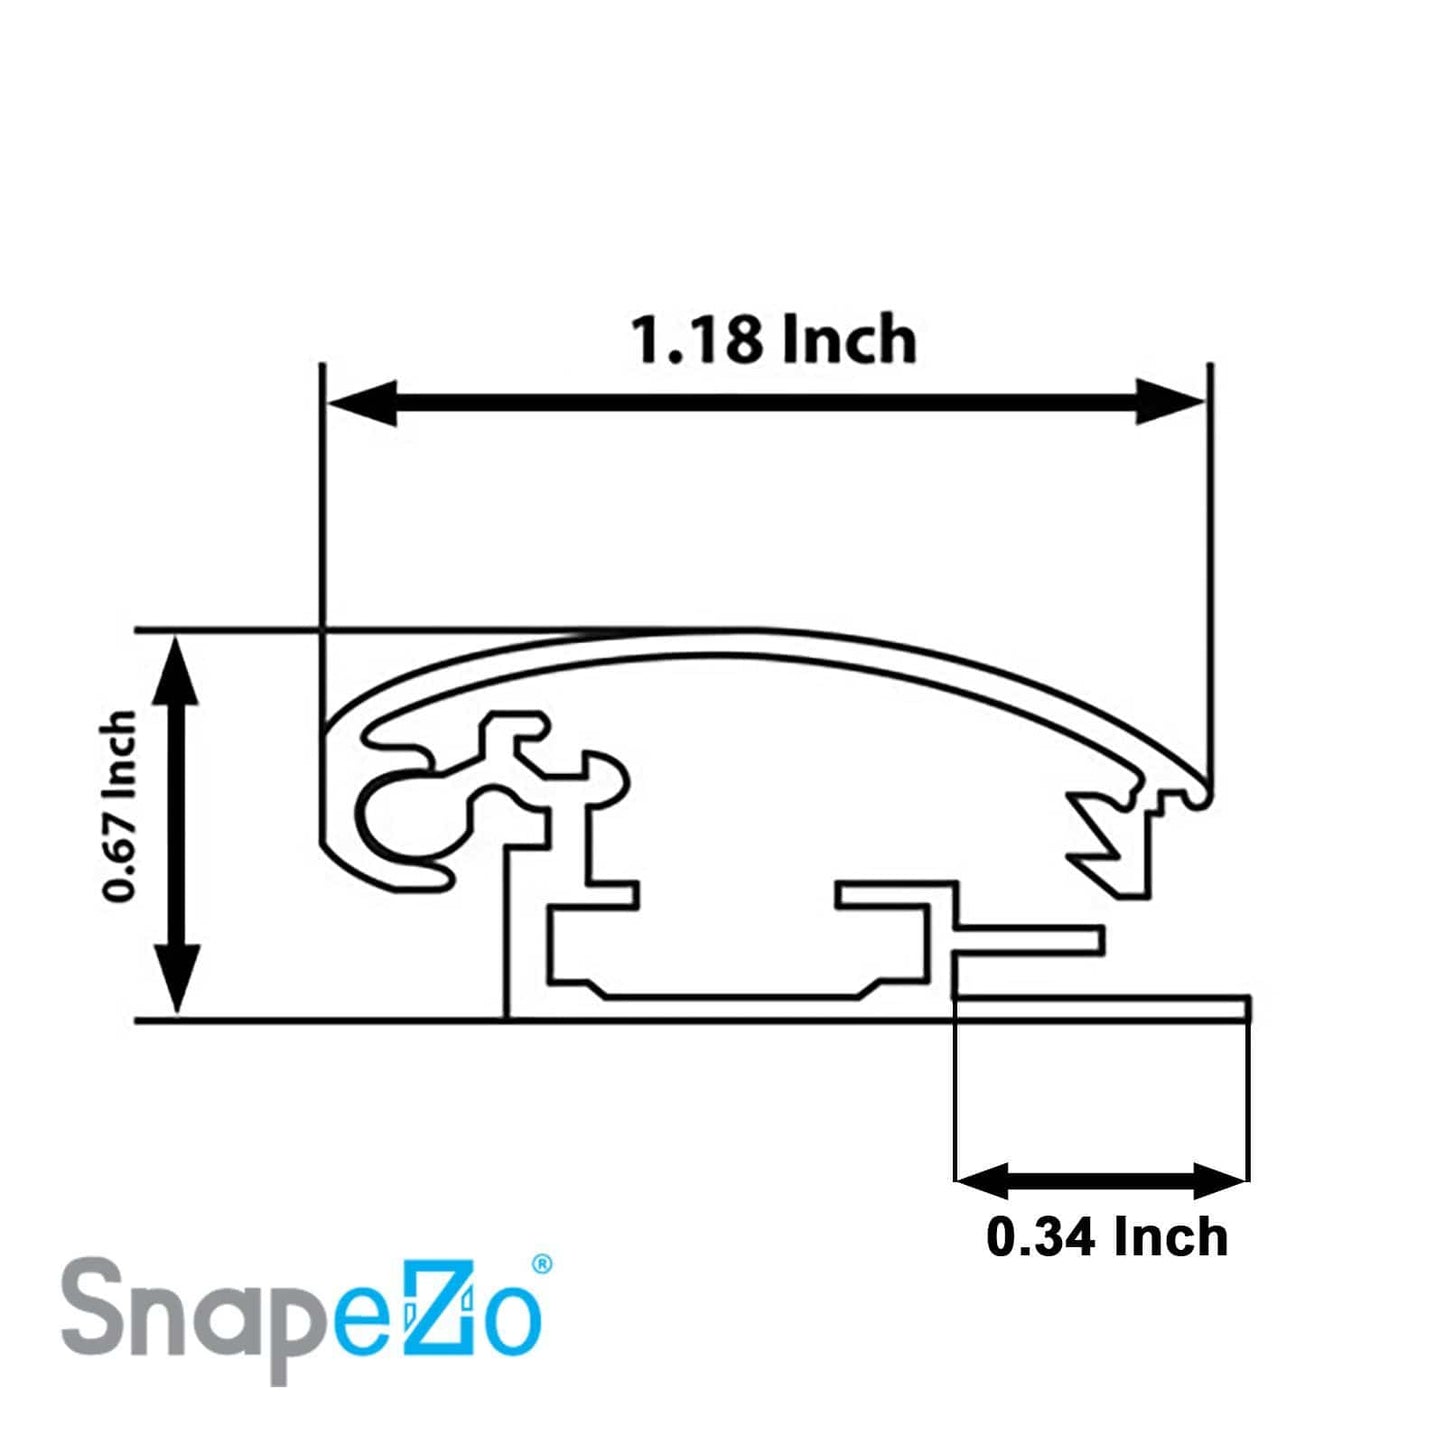 14x16 Red SnapeZo® Snap Frame - 1.2" Profile - Snap Frames Direct